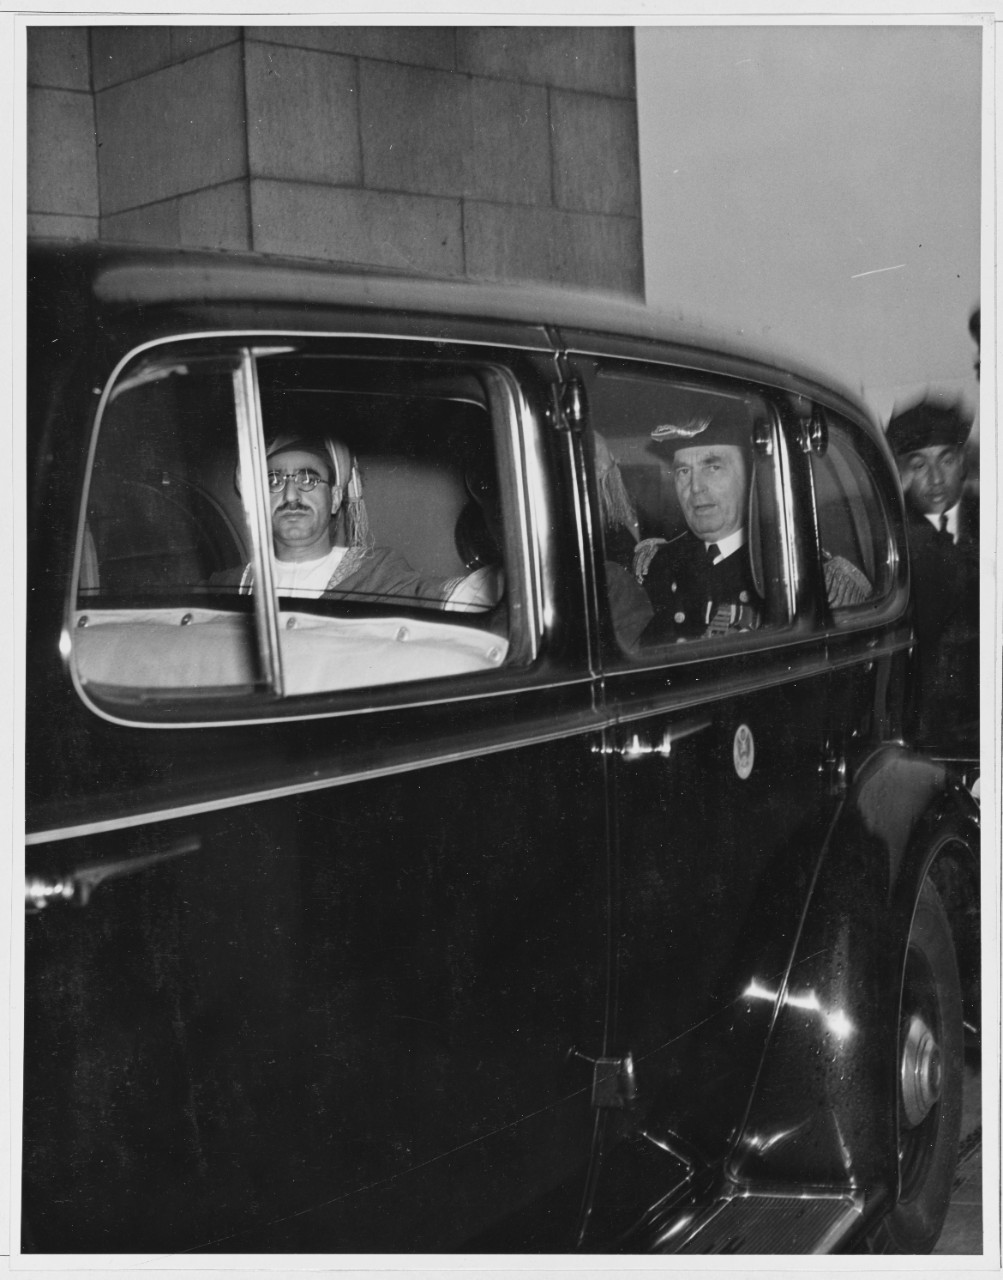 The Sultan of Muscat and Oman with Admiral Leahy in a car. March 1938